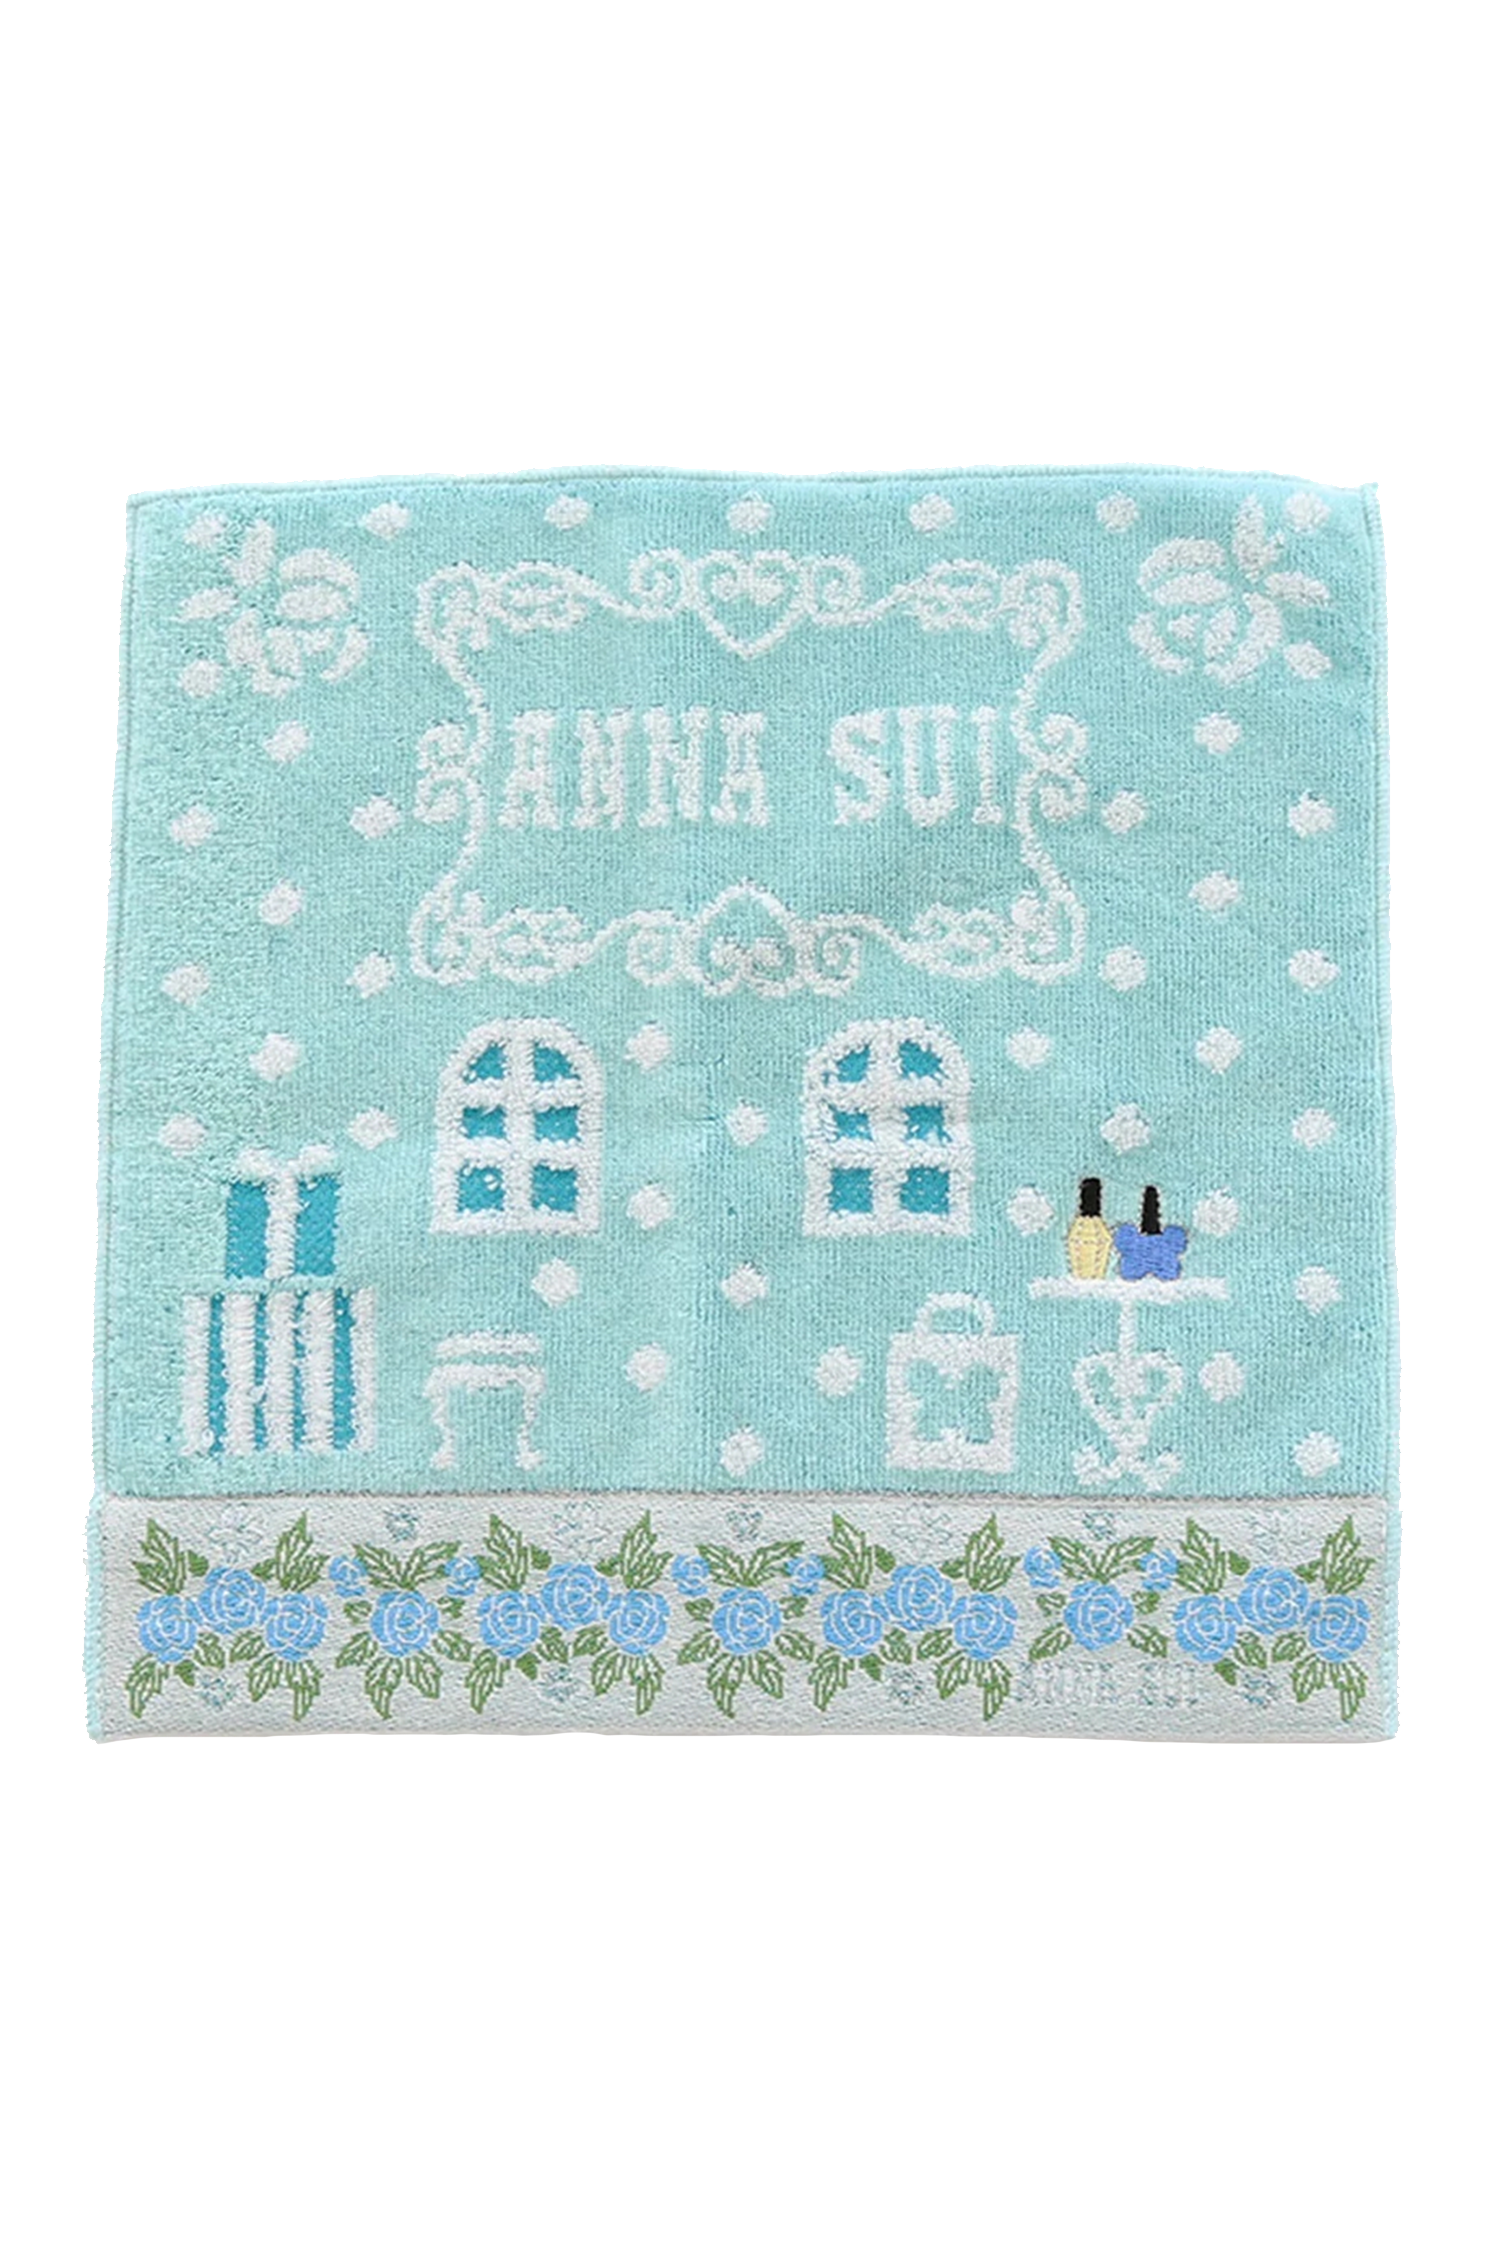 Washcloth, baby blue, white shop design, Anna Sui label, presents, table, bottom with blue roses line